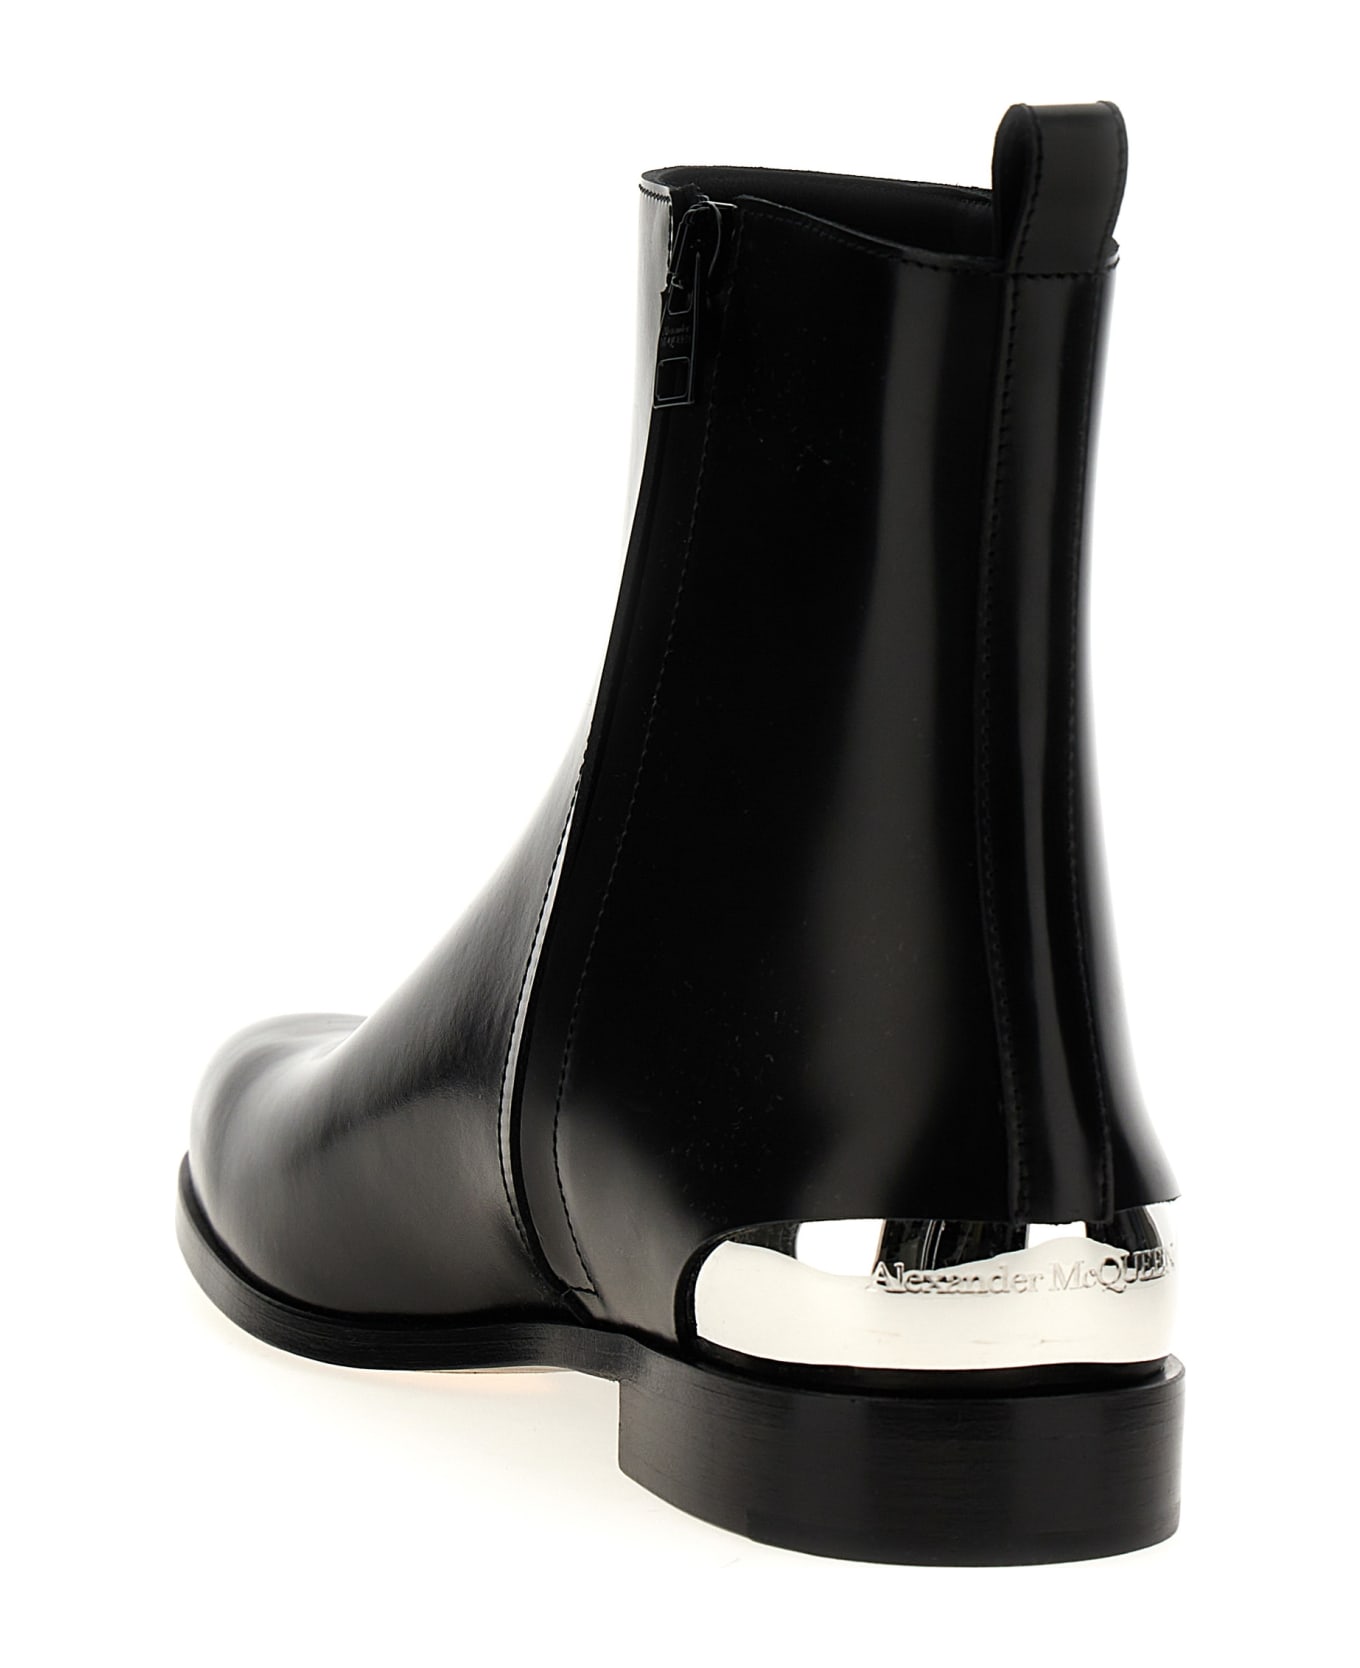 Alexander McQueen Ankle Boots - Black ブーツ